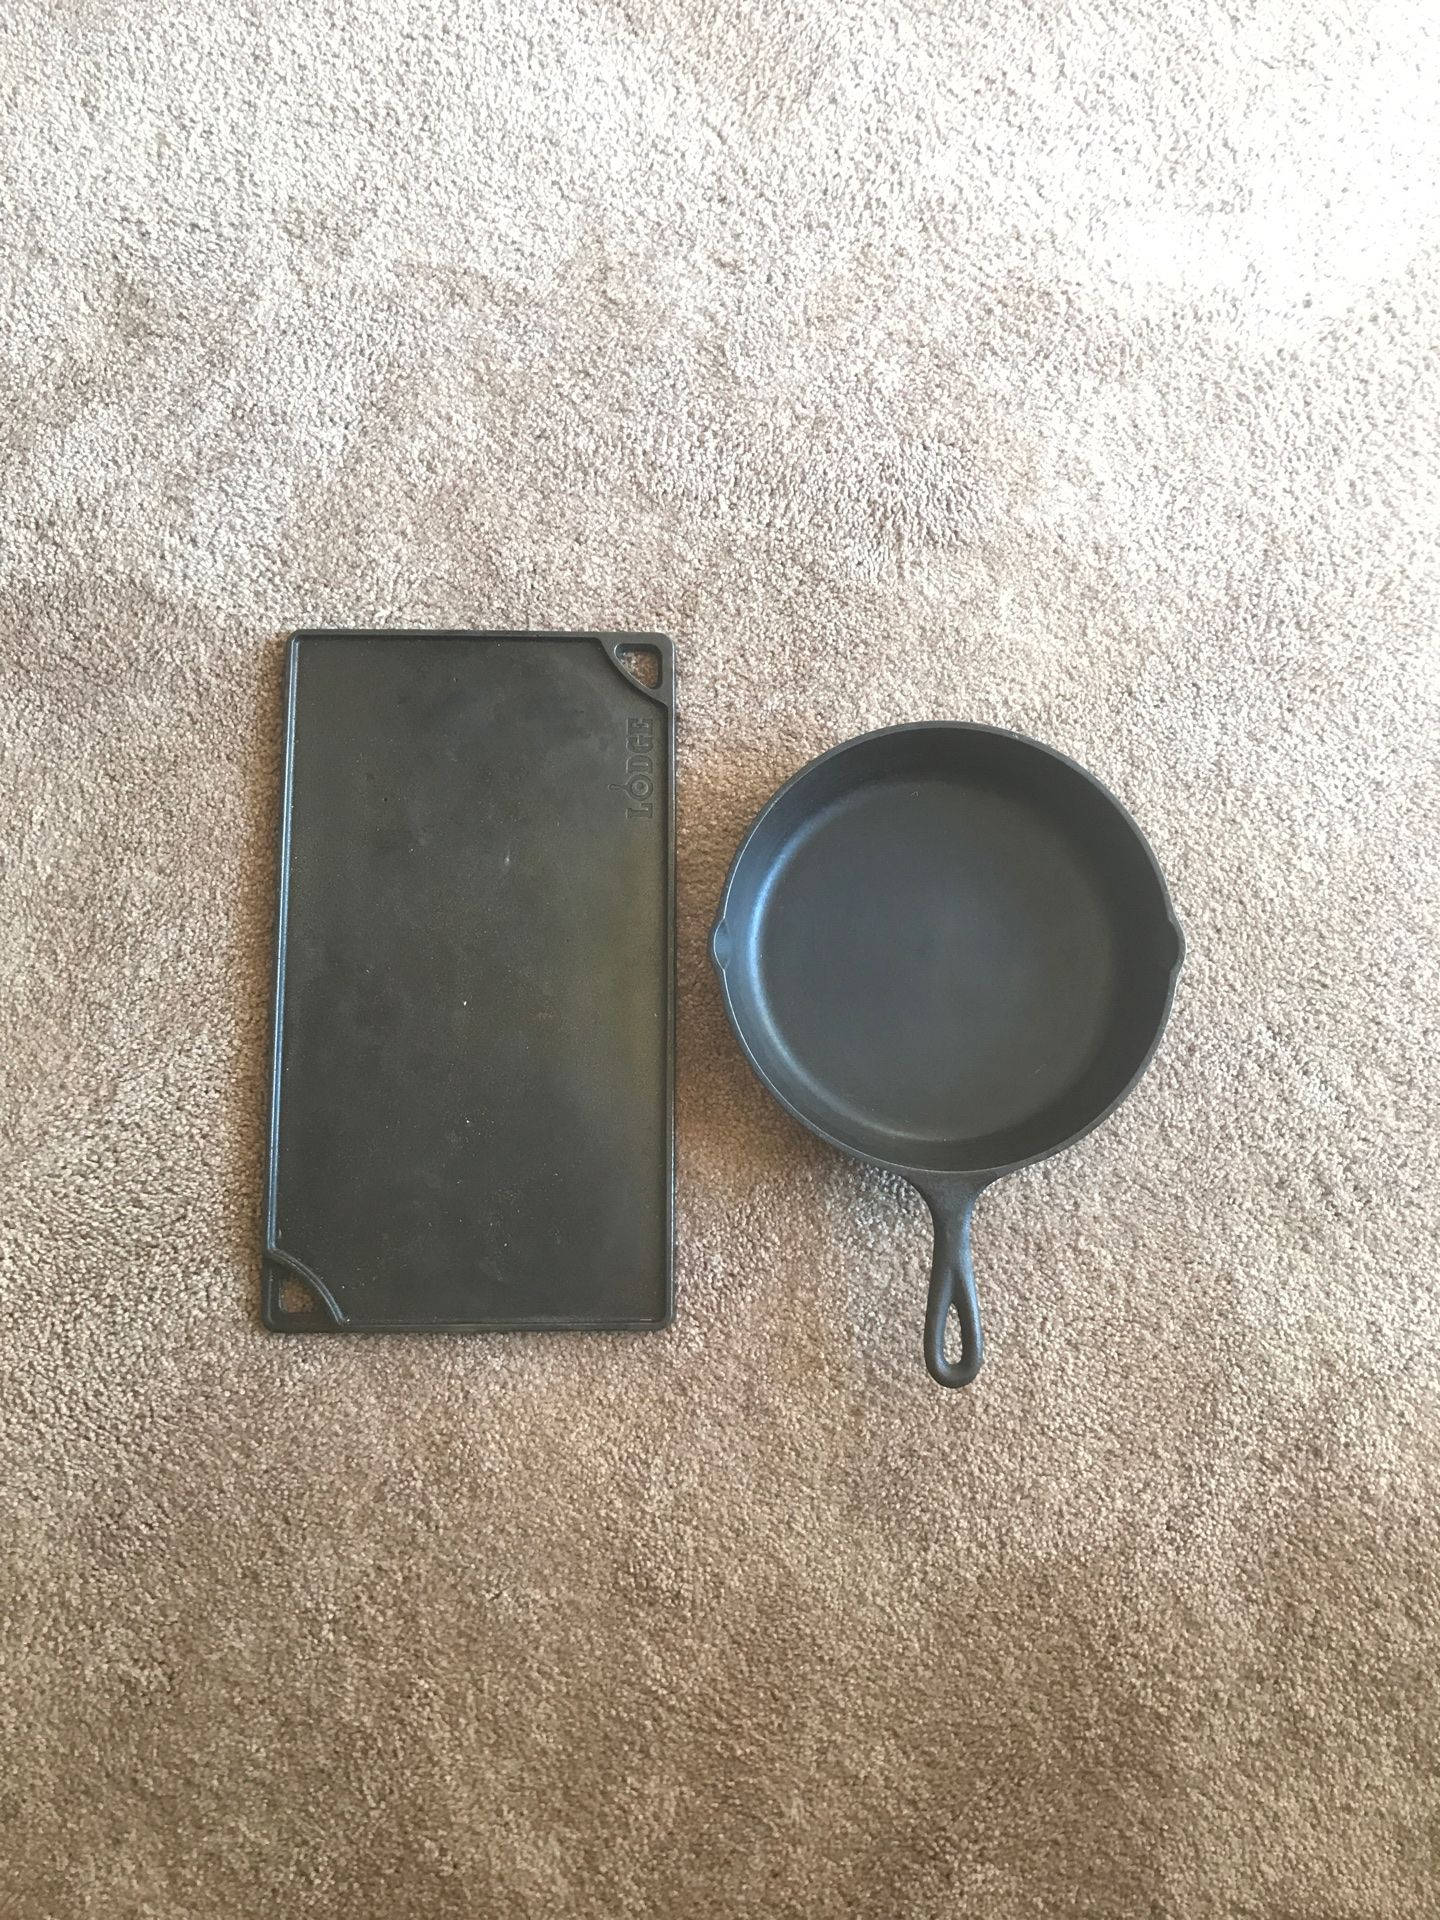 Used and good condition lodge cast iron skillet and griddle